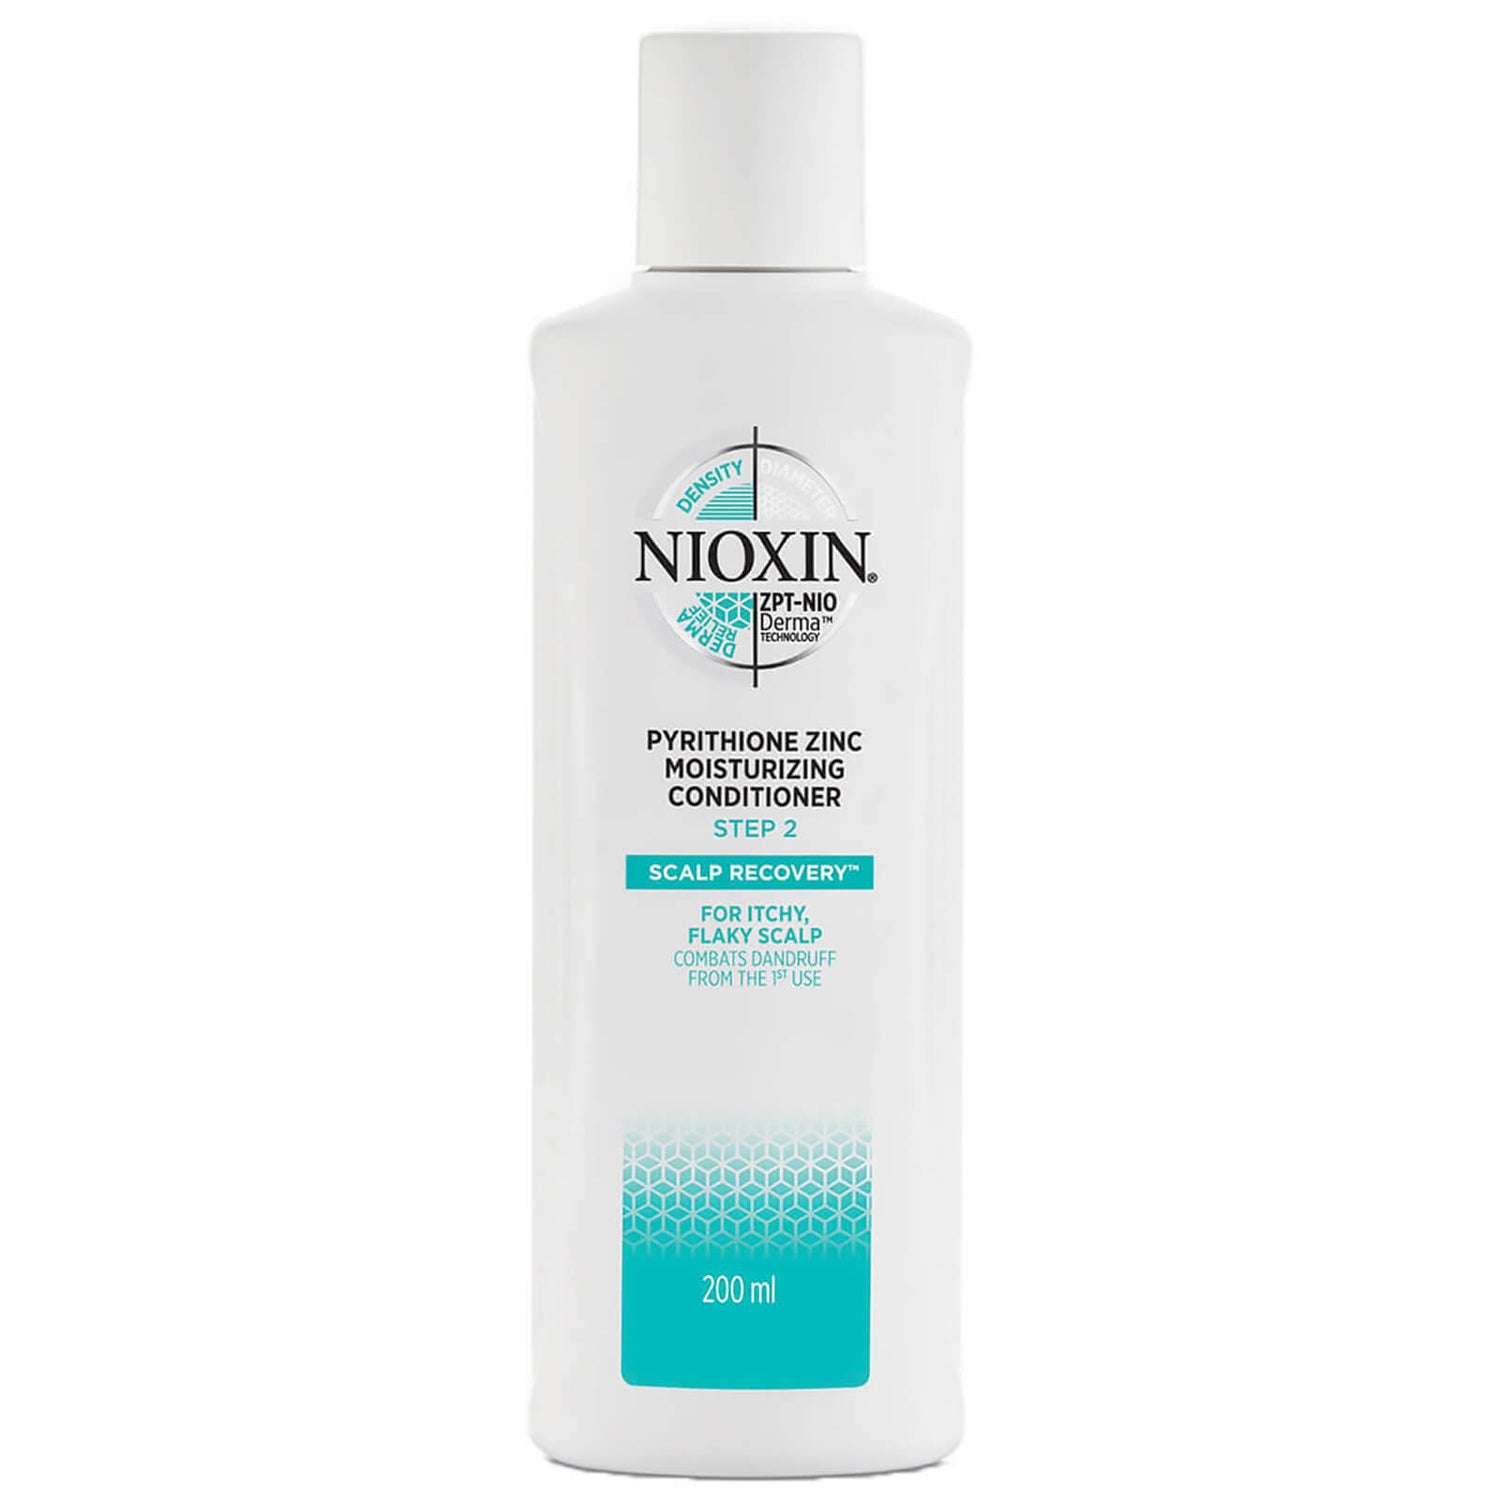 NIOXIN Scalp Recovery Anti-Dandruff Moisturising Conditioner for Itchy, Flaky Scalp -hoitoaine, 200 ml